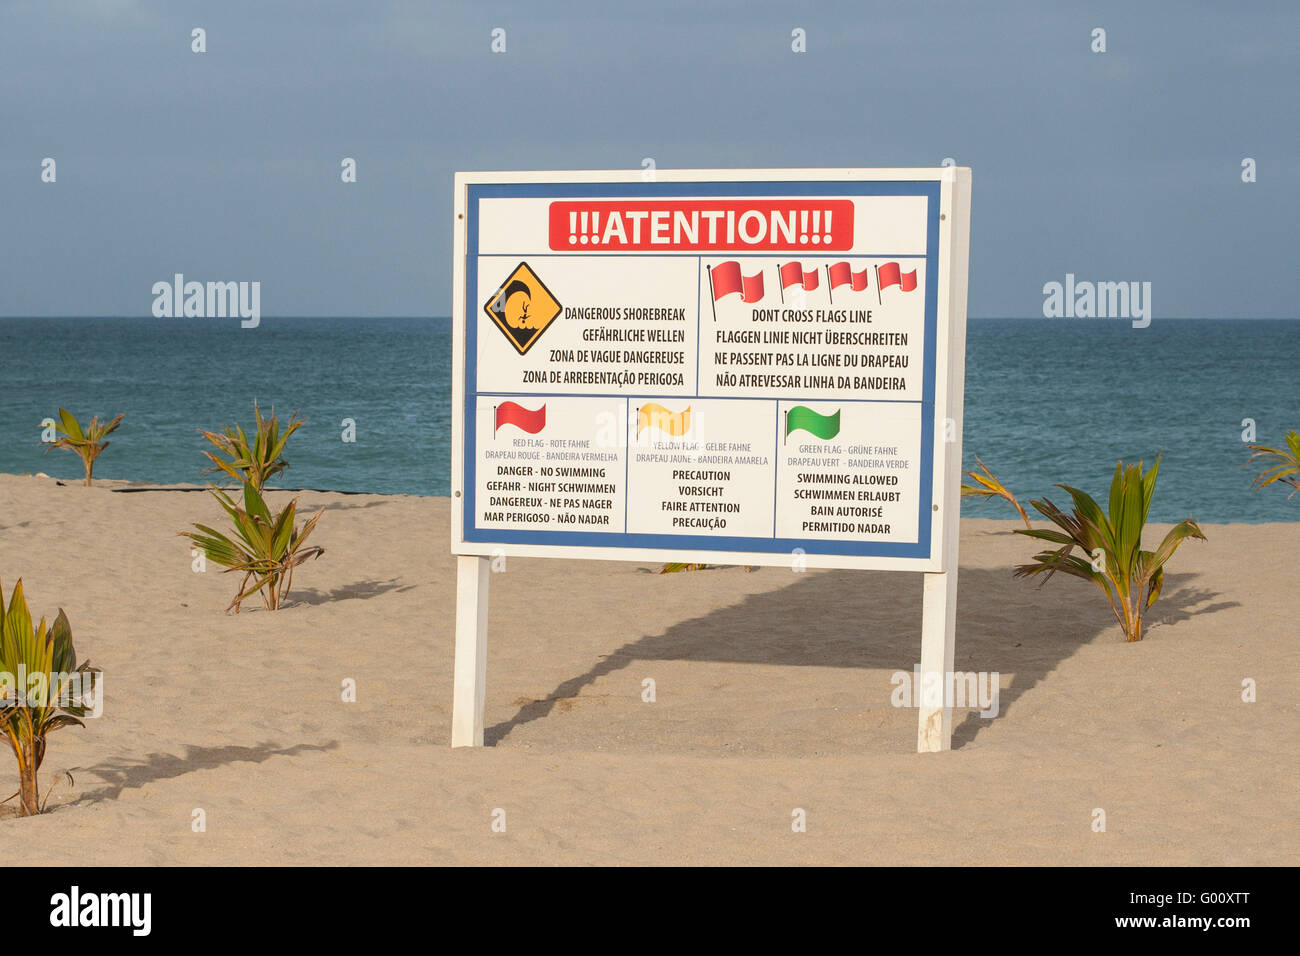 Sign on beach giving sea condition warnings to swimmers, Boa Vista, Cape Verde Stock Photo